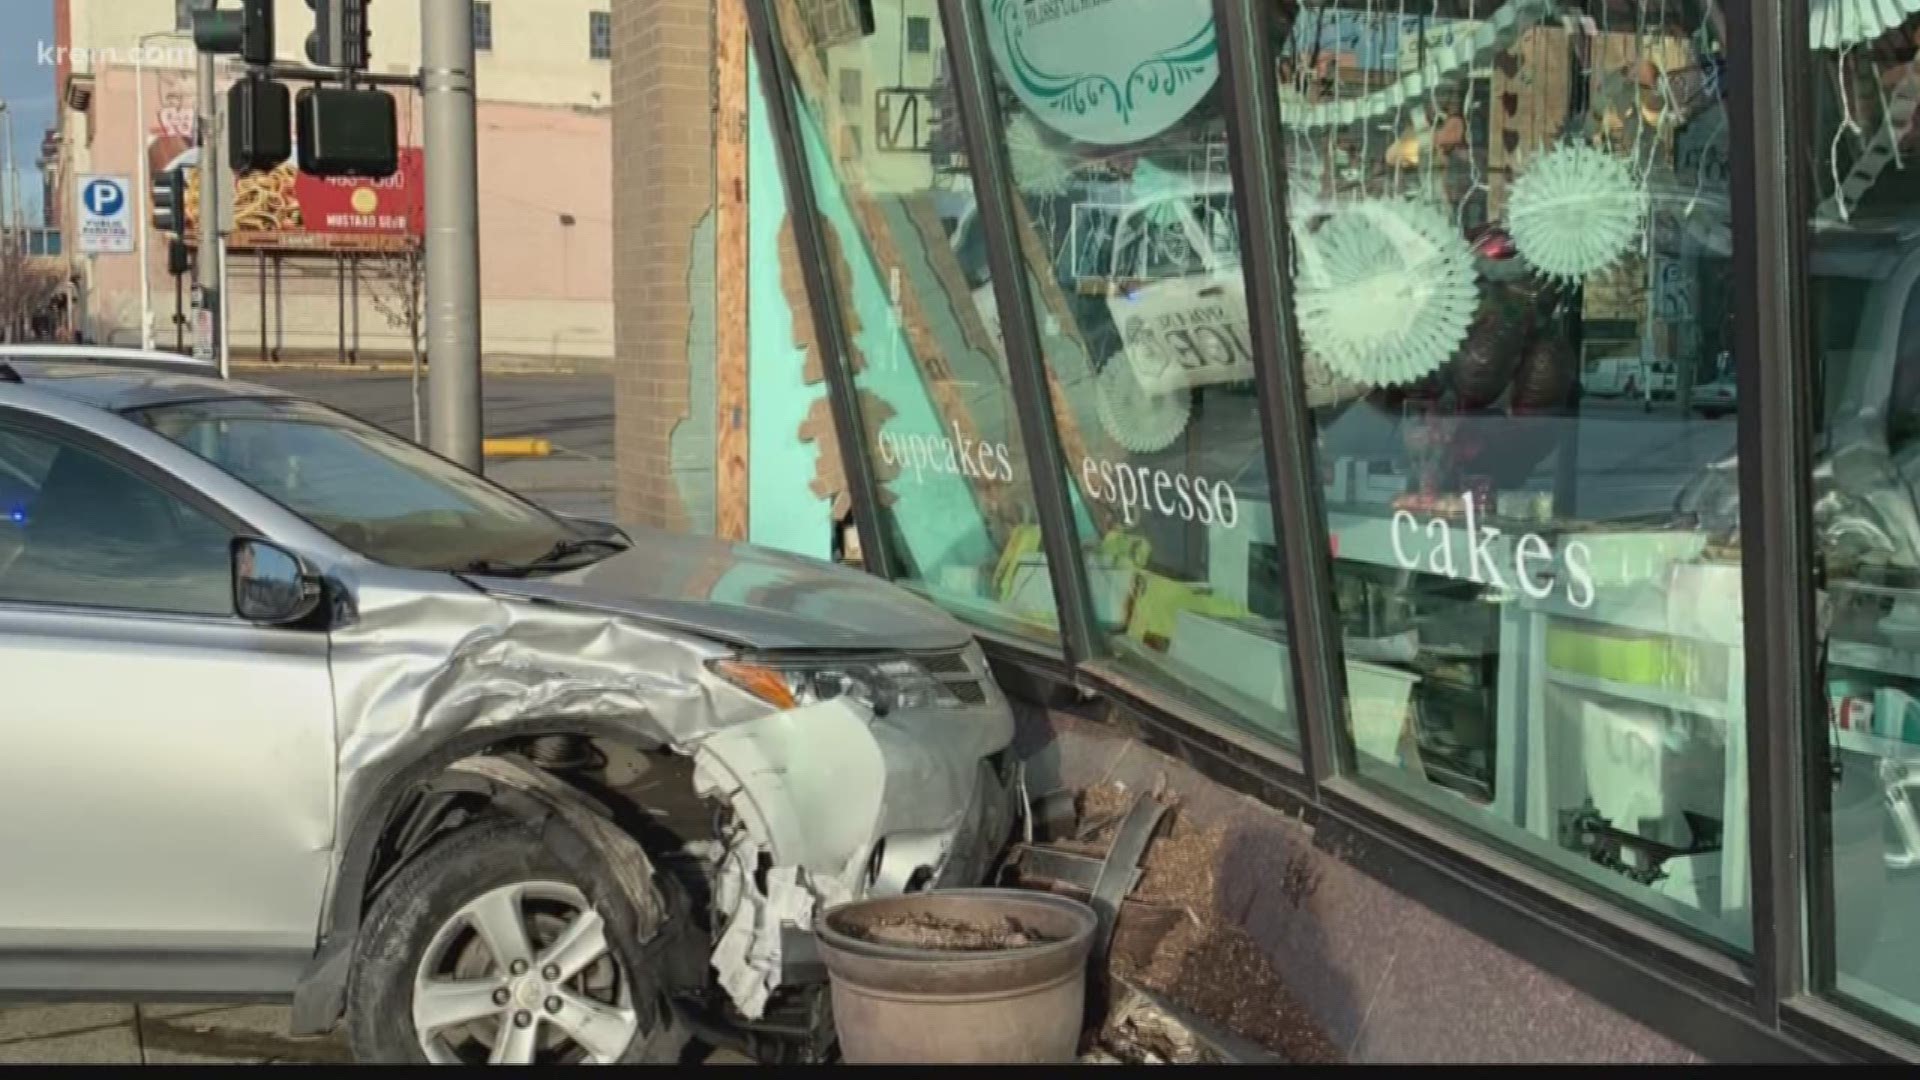 A car crashed into Sweet Frostings' downtown location just days after another crashed into Prohibition Gastropub ahead of Restaurant Week.